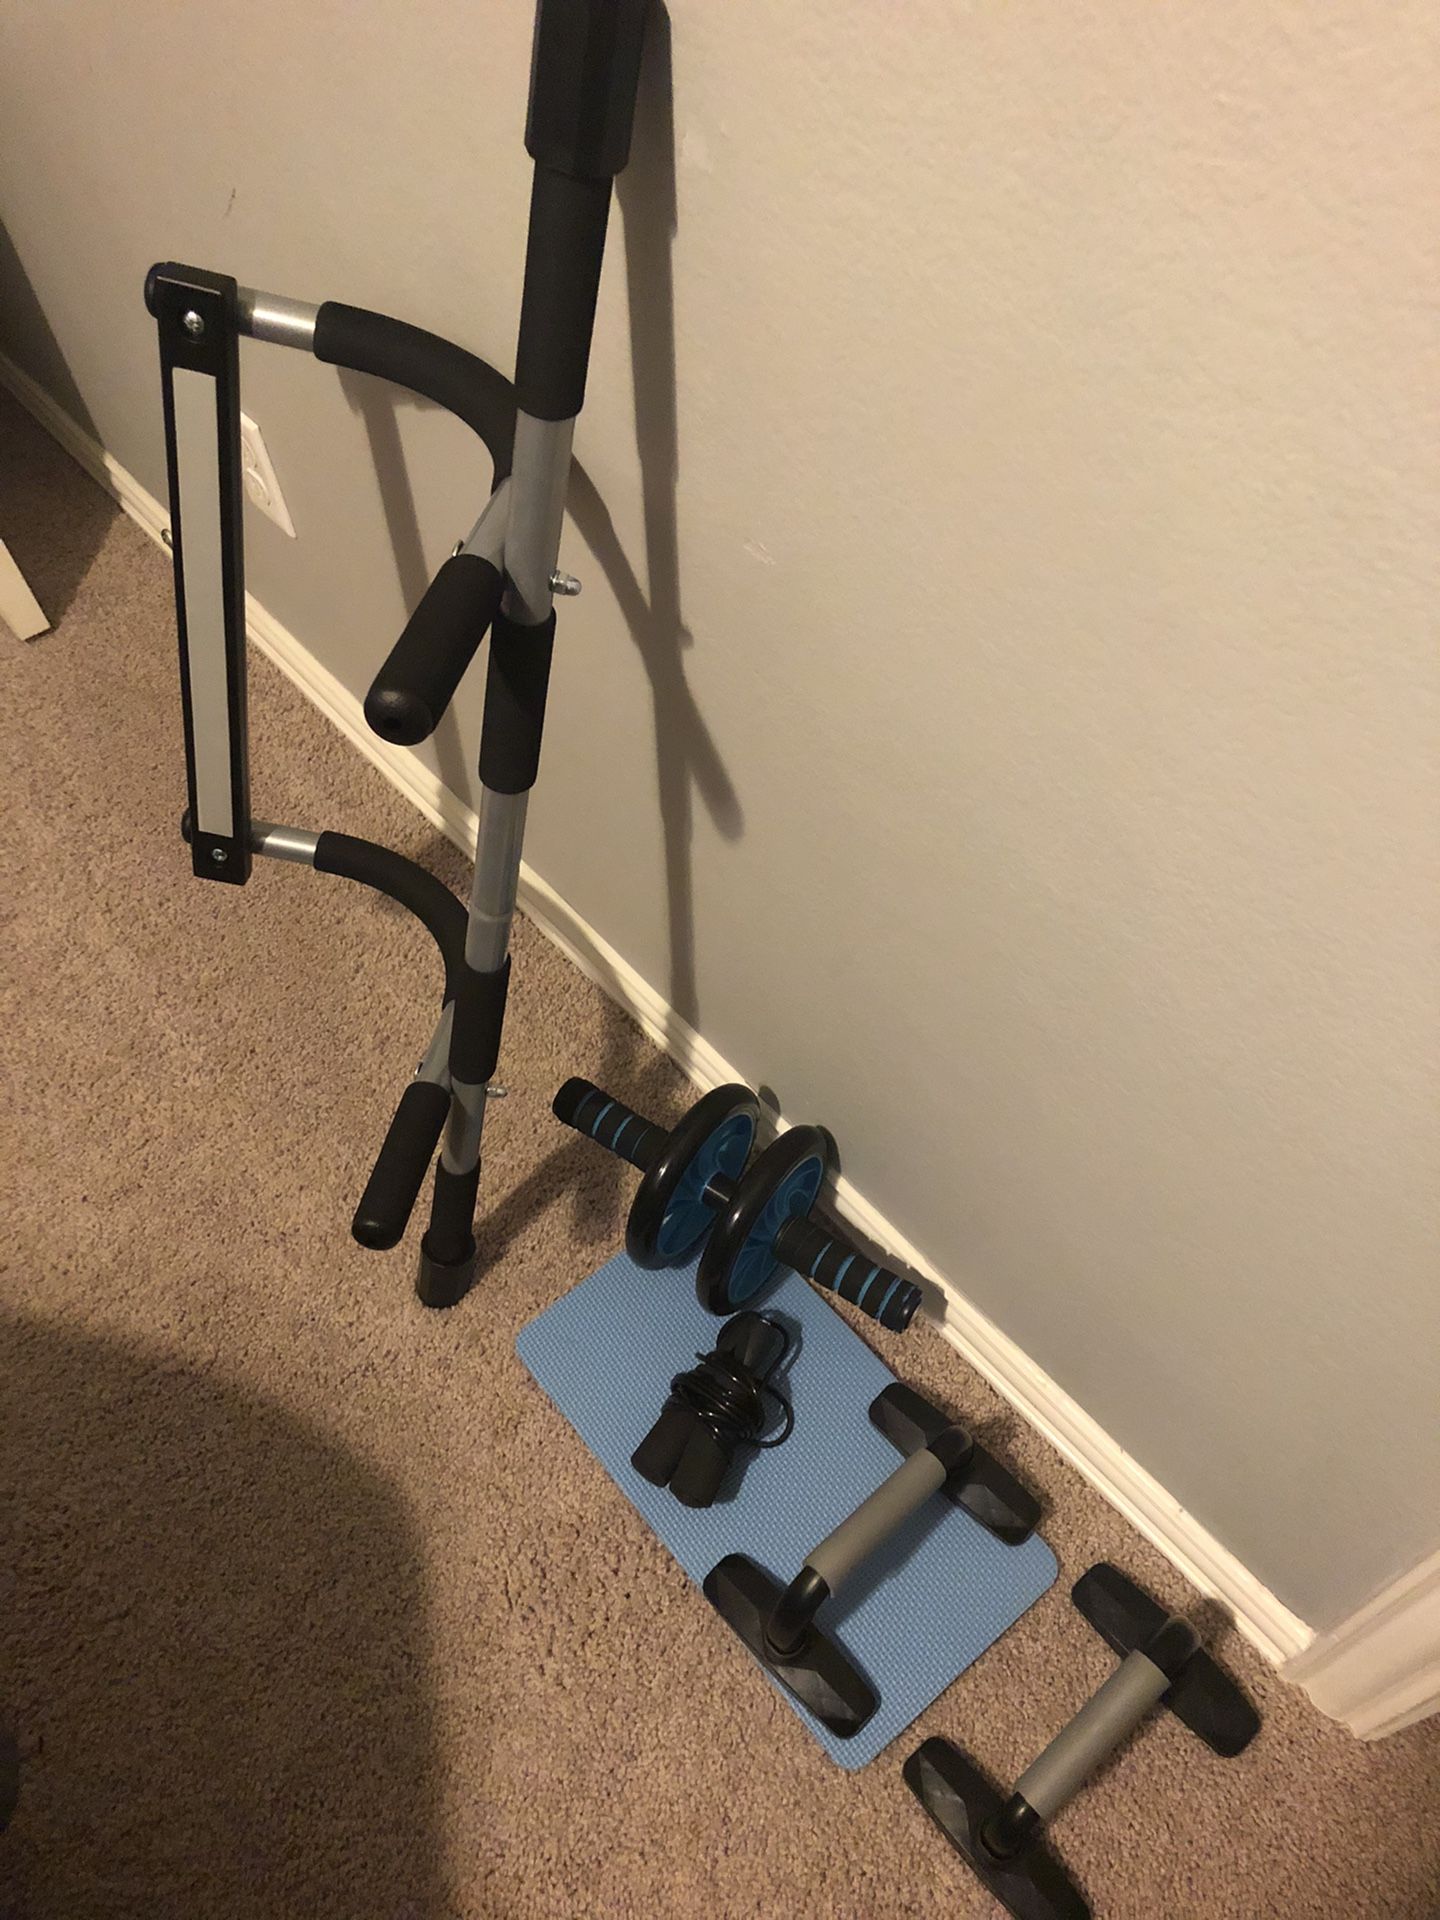 Home workout equipment